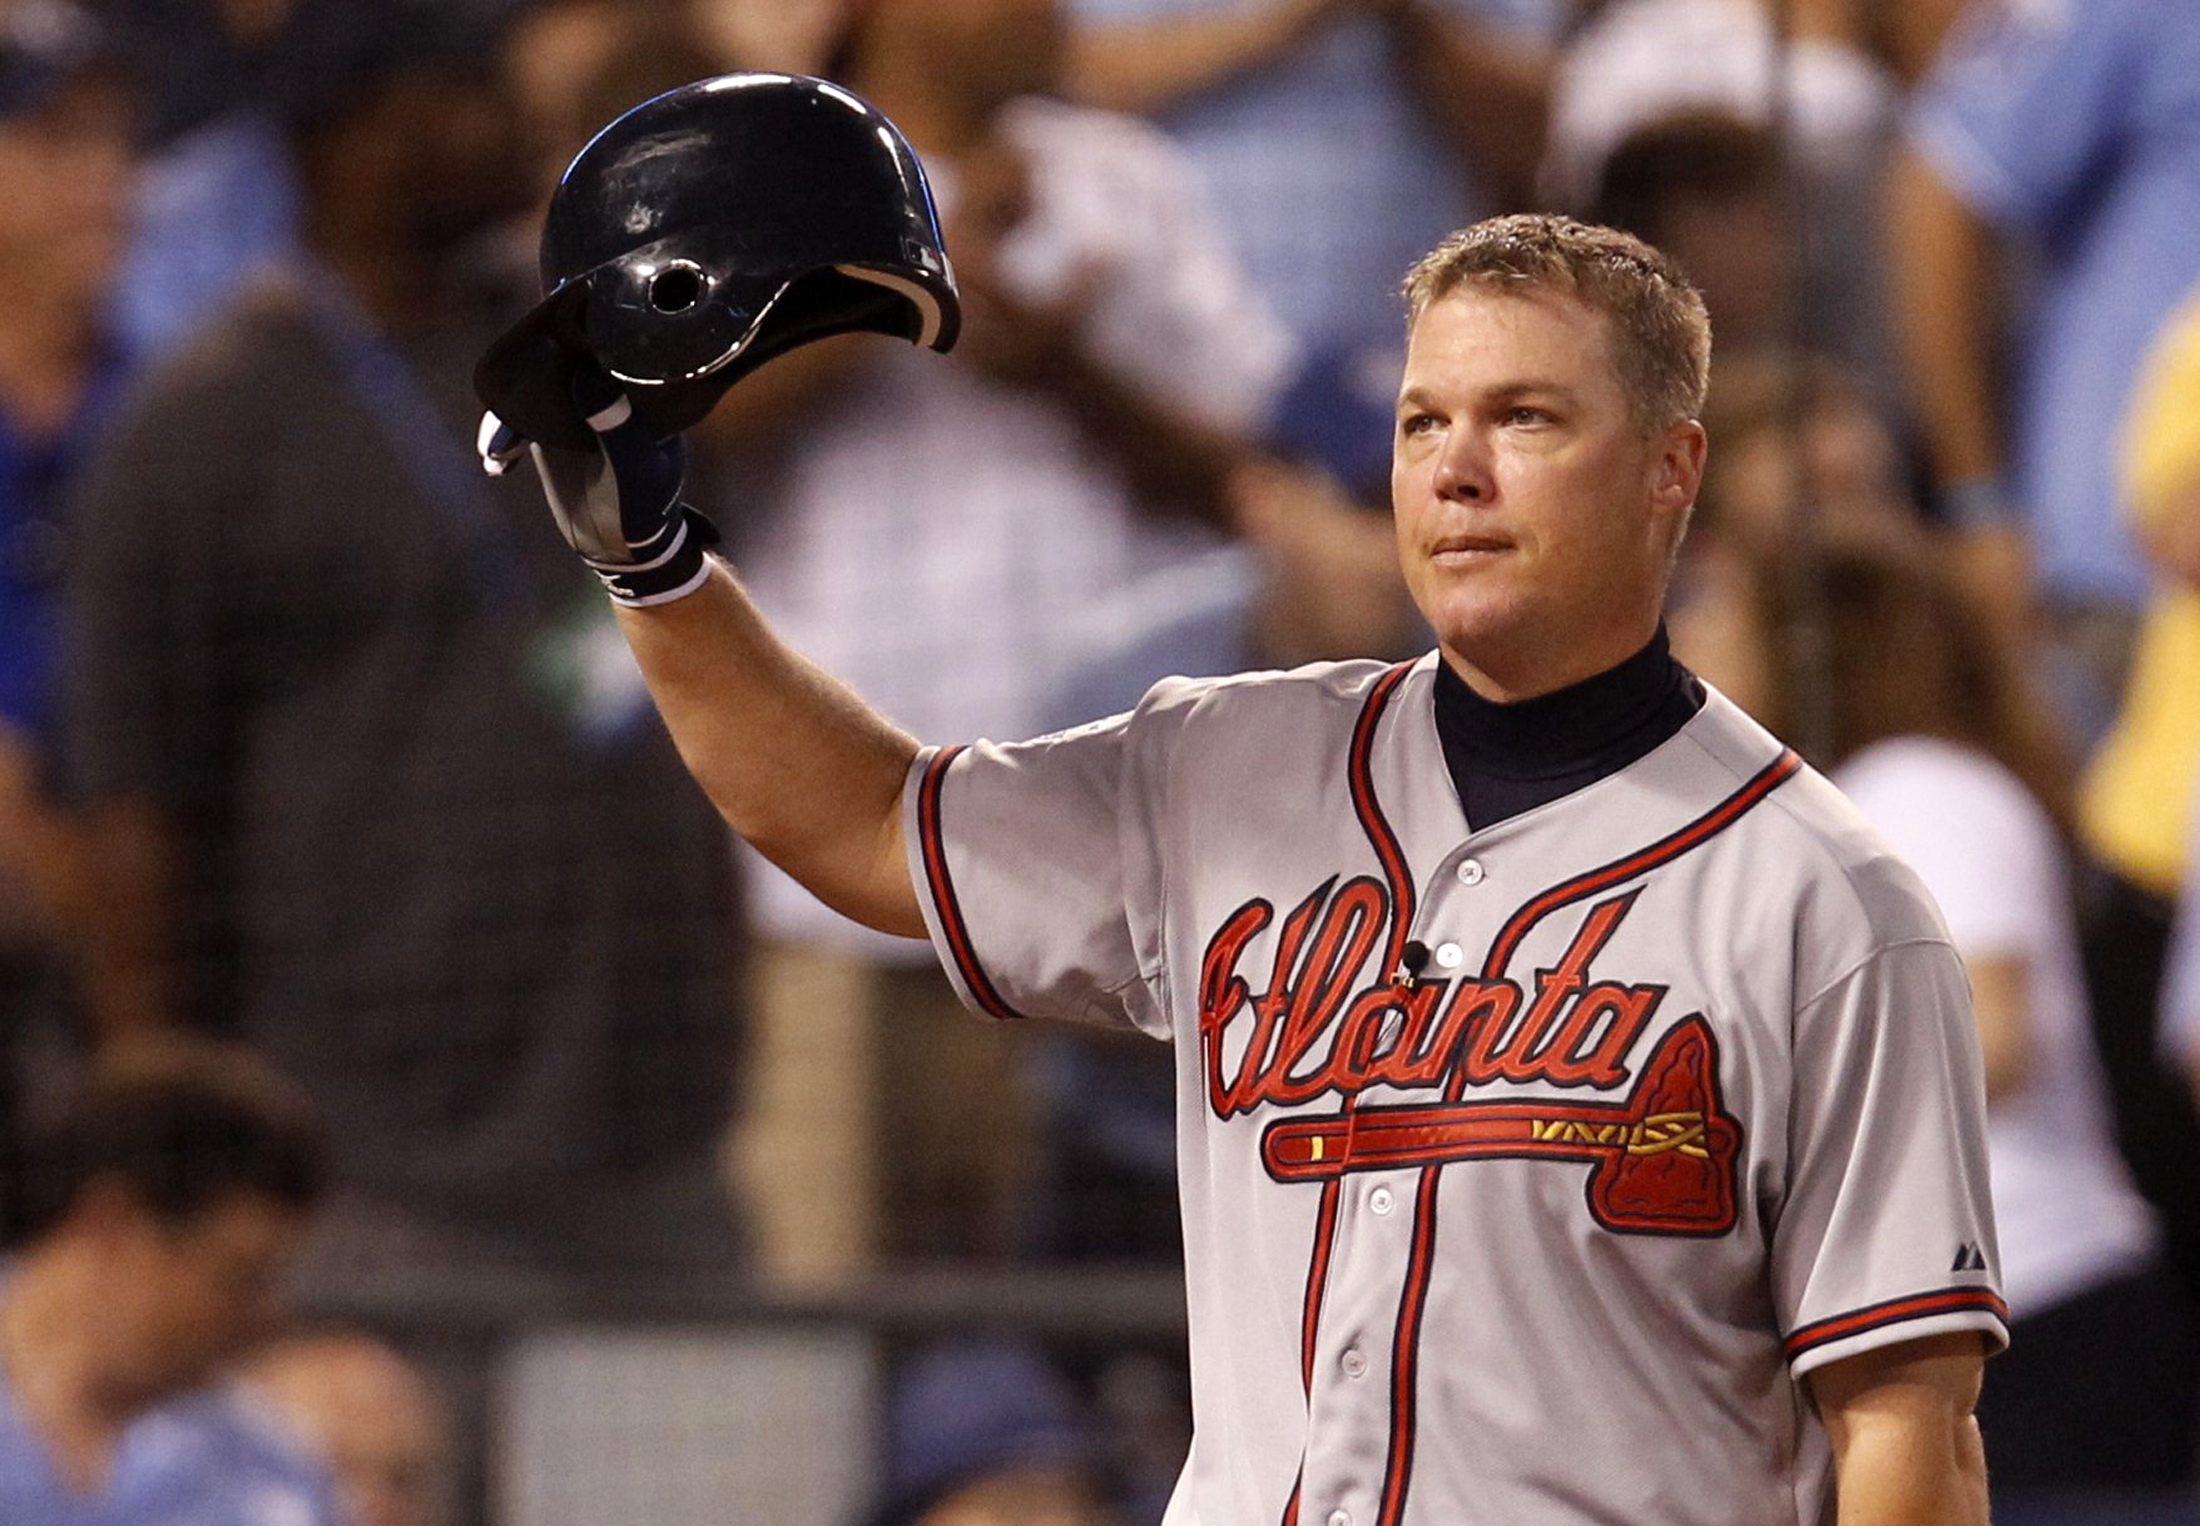 Could you see more of Chipper Jones on TV?